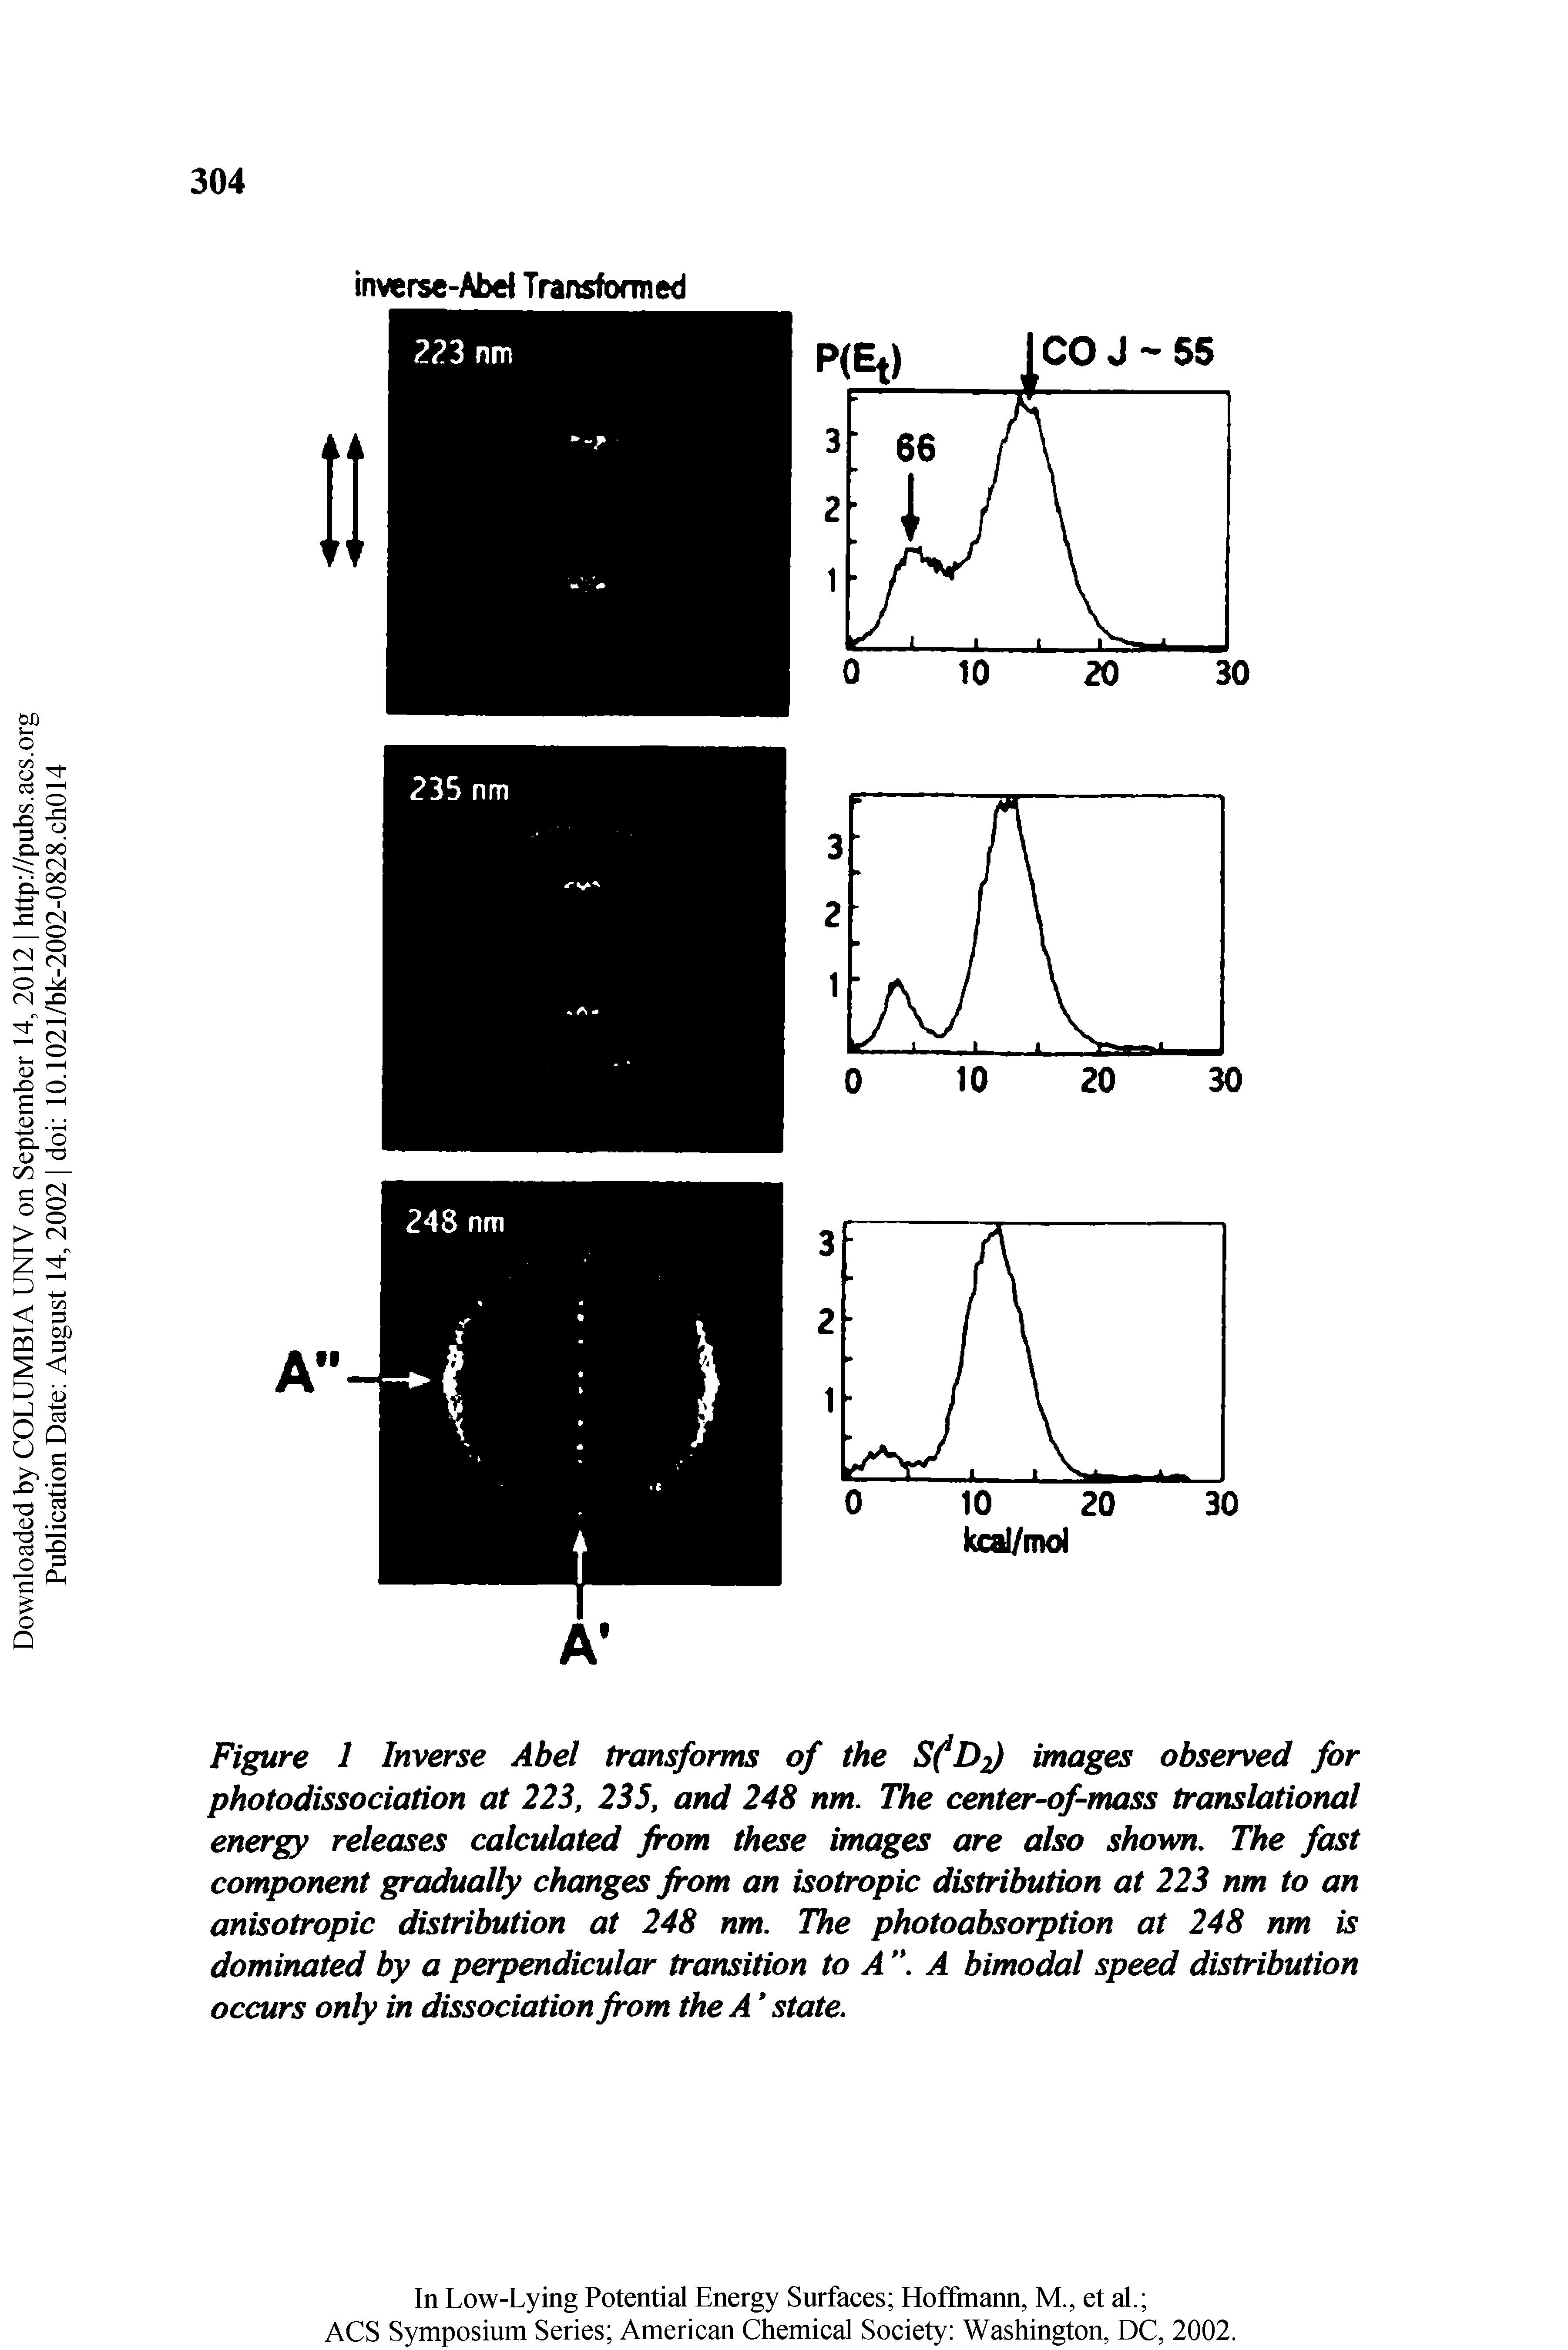 Figure 1 Inverse Abel transforms of the SfDz) images observed for photodissociation at 223, 235, and 248 nm. The center-of-mass translational energy releases calculated from these images are also shown. The fast component gradually changes from an isotropic distribution at 223 nm to an anisotropic distribution at 248 nm. The photoabsorption at 248 nm is dominated by a perpendicular transition to A A bimodal speed distribution occurs only in dissociation from the A state.